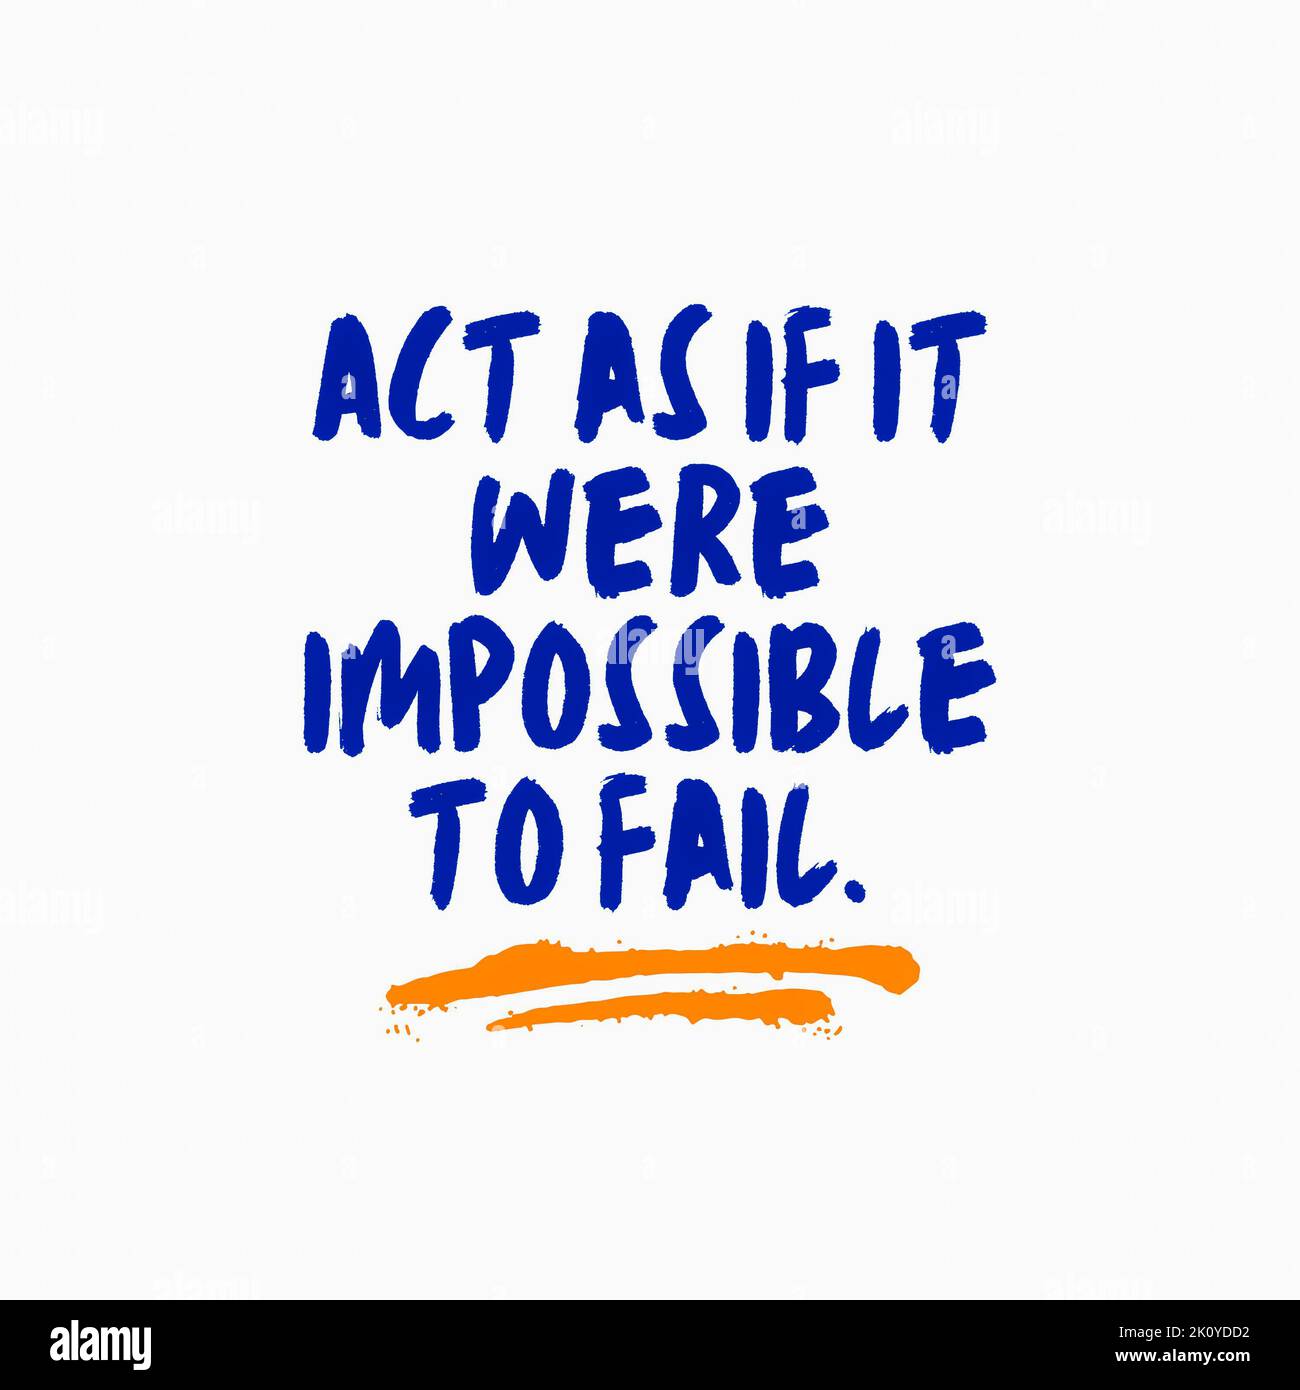 Act as if it were impossible to fail. Motivational Quote Stock Photo